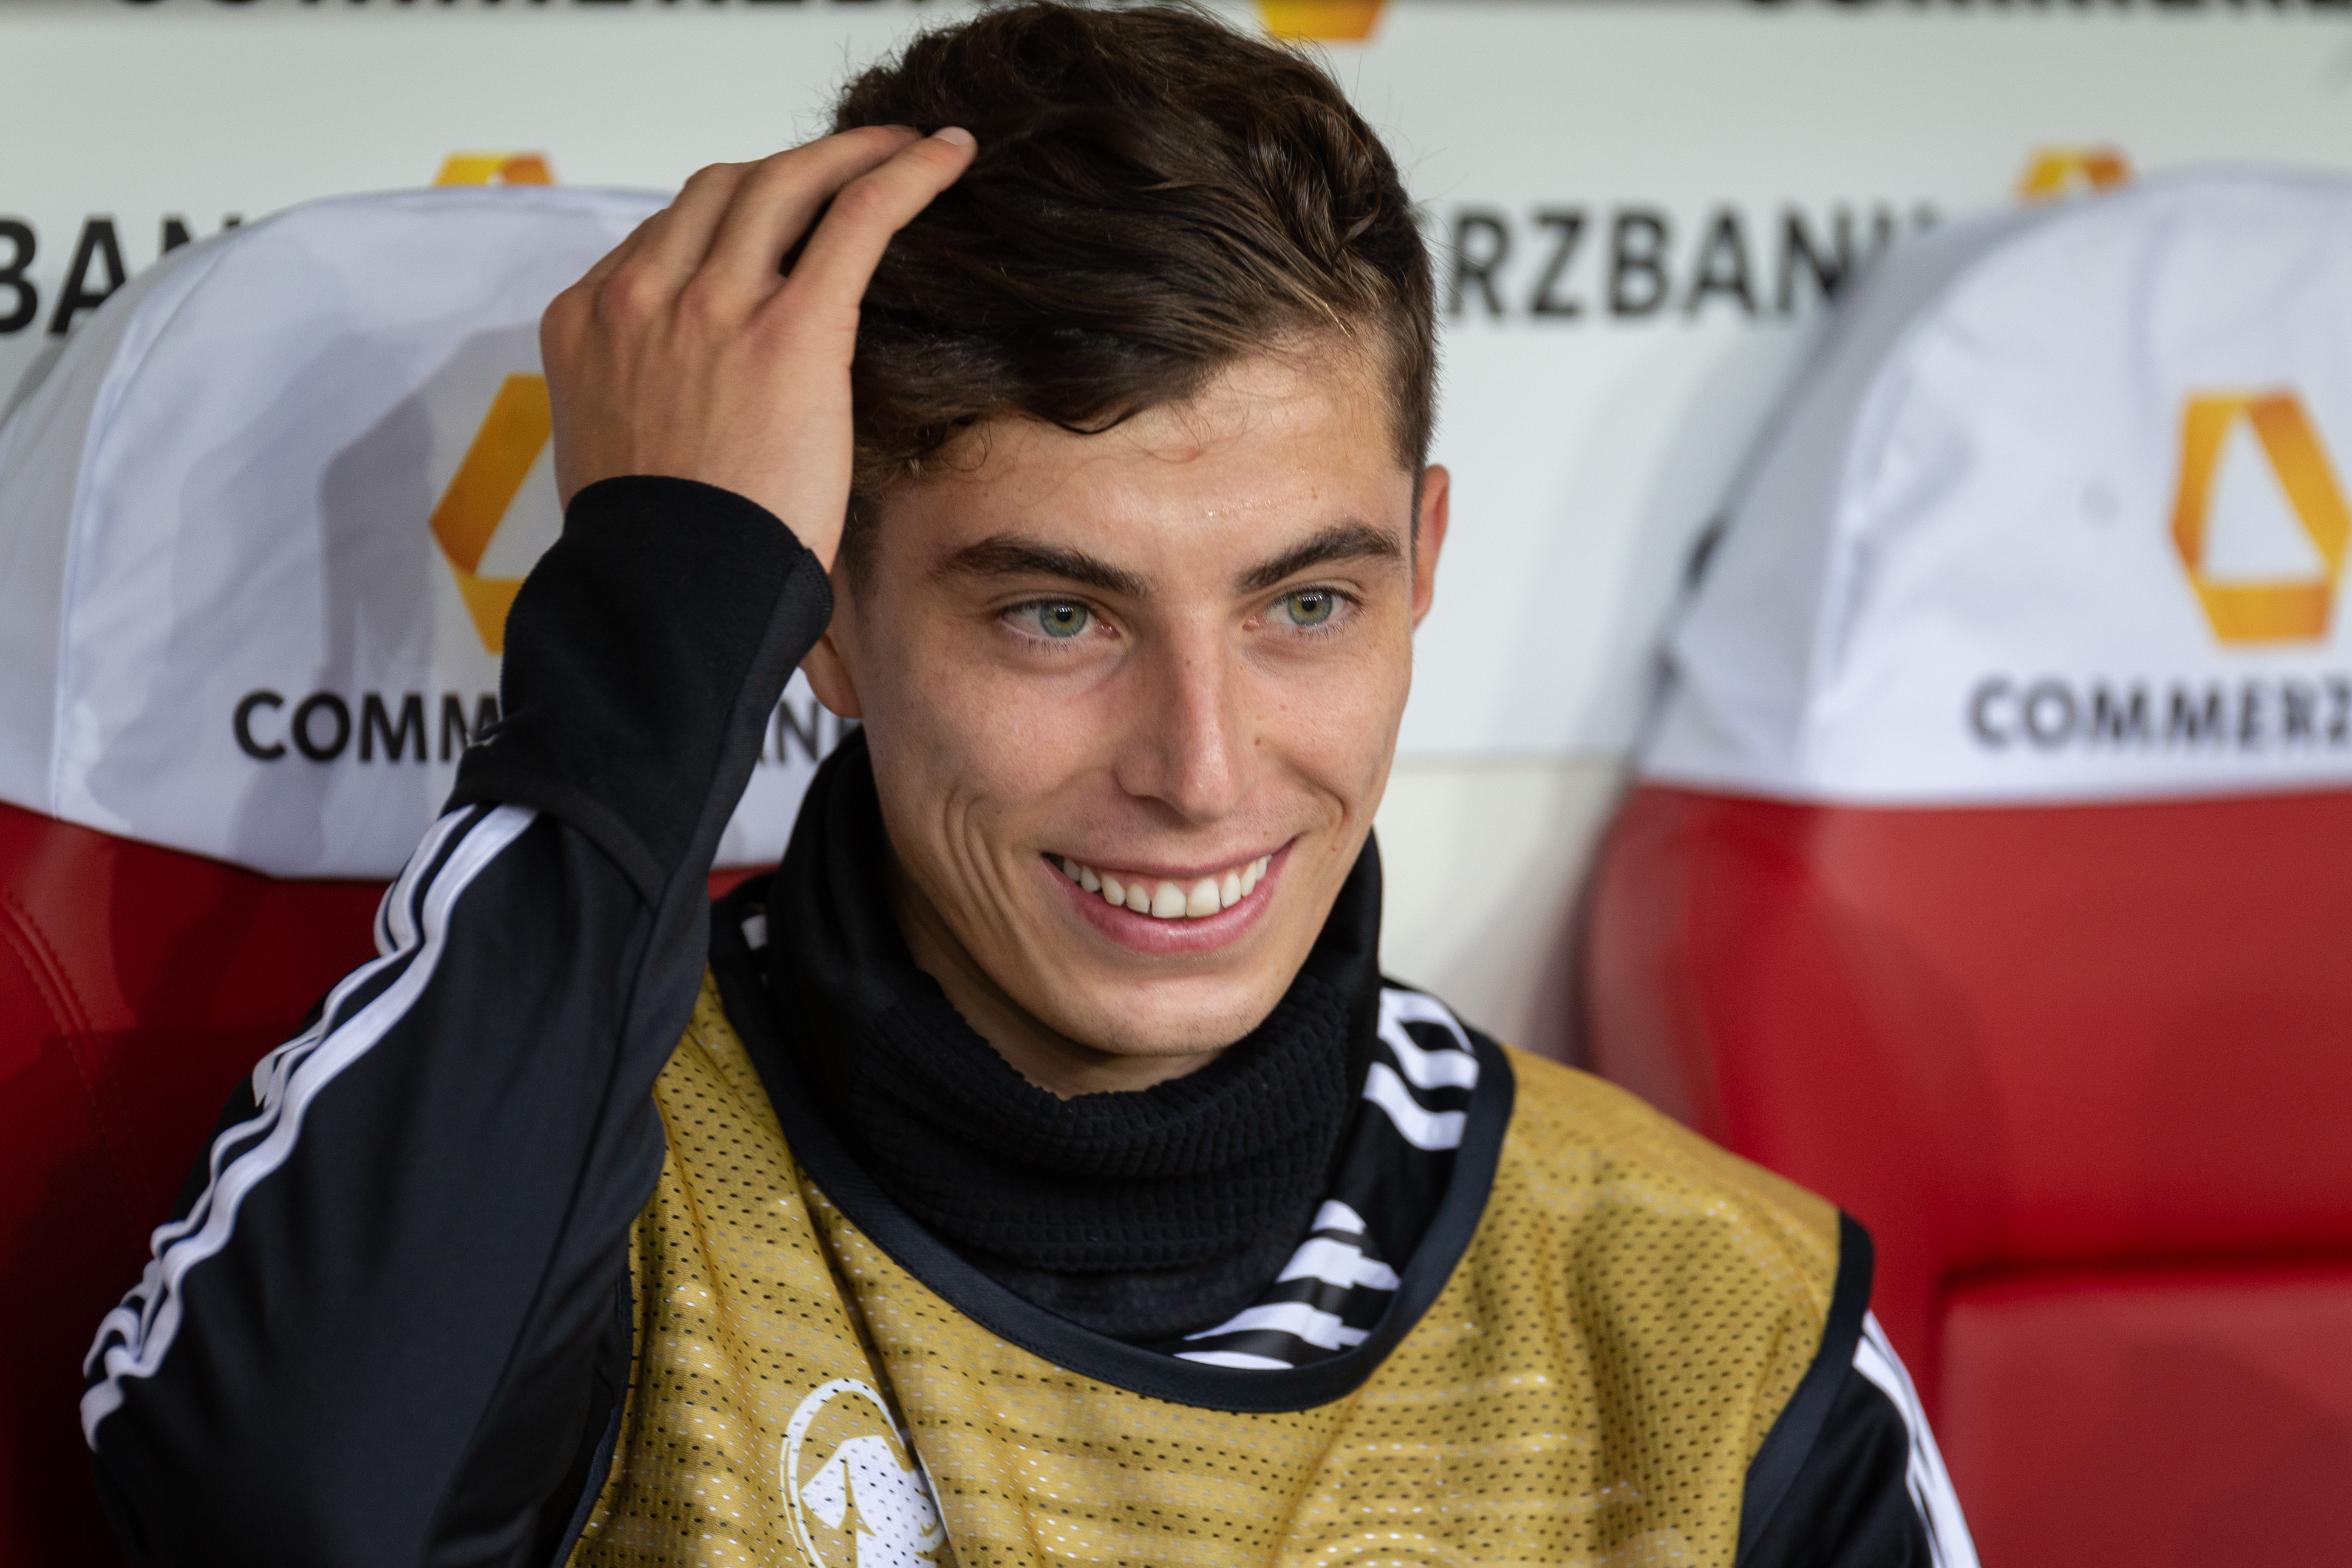 10 Things You May Not Know About Kai Havertz